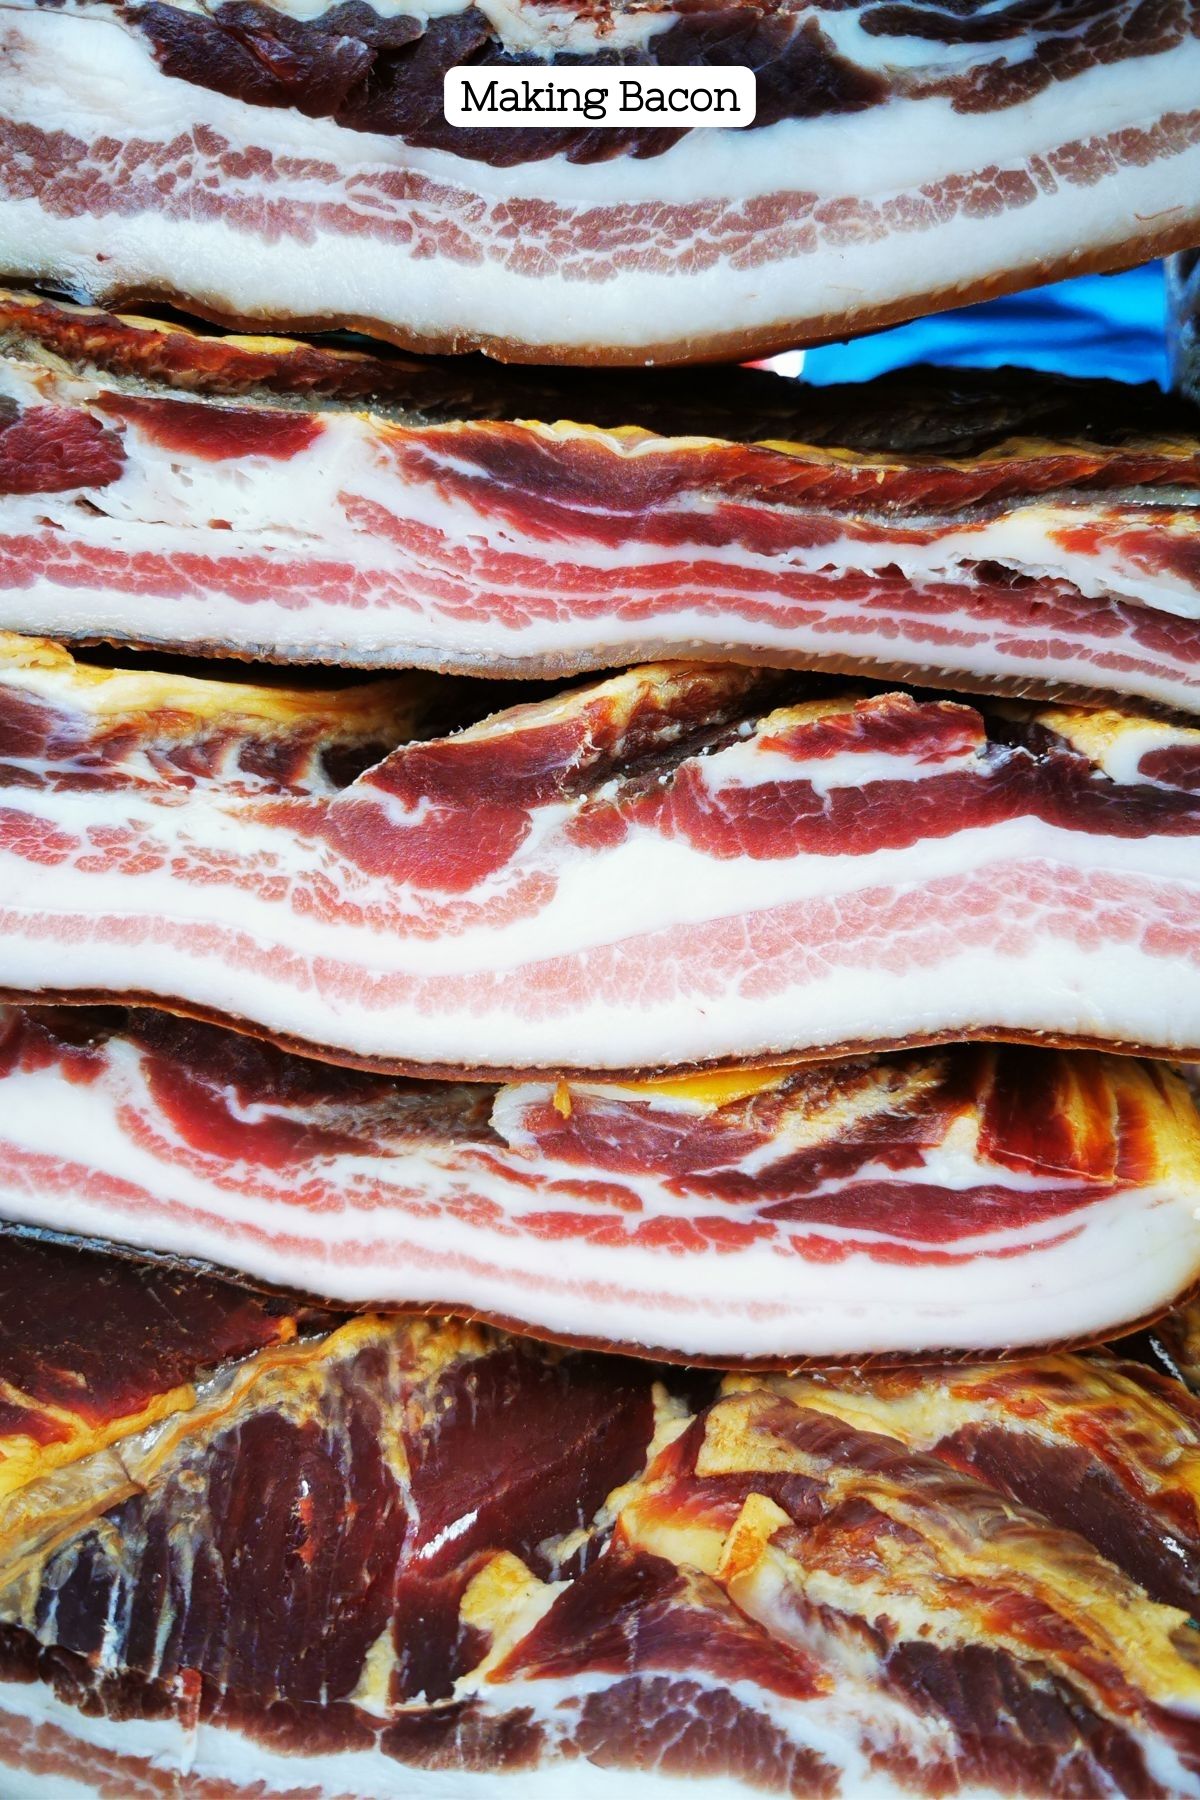 A stack of several strips of bacon with various colors from top to bottom slightly separated.